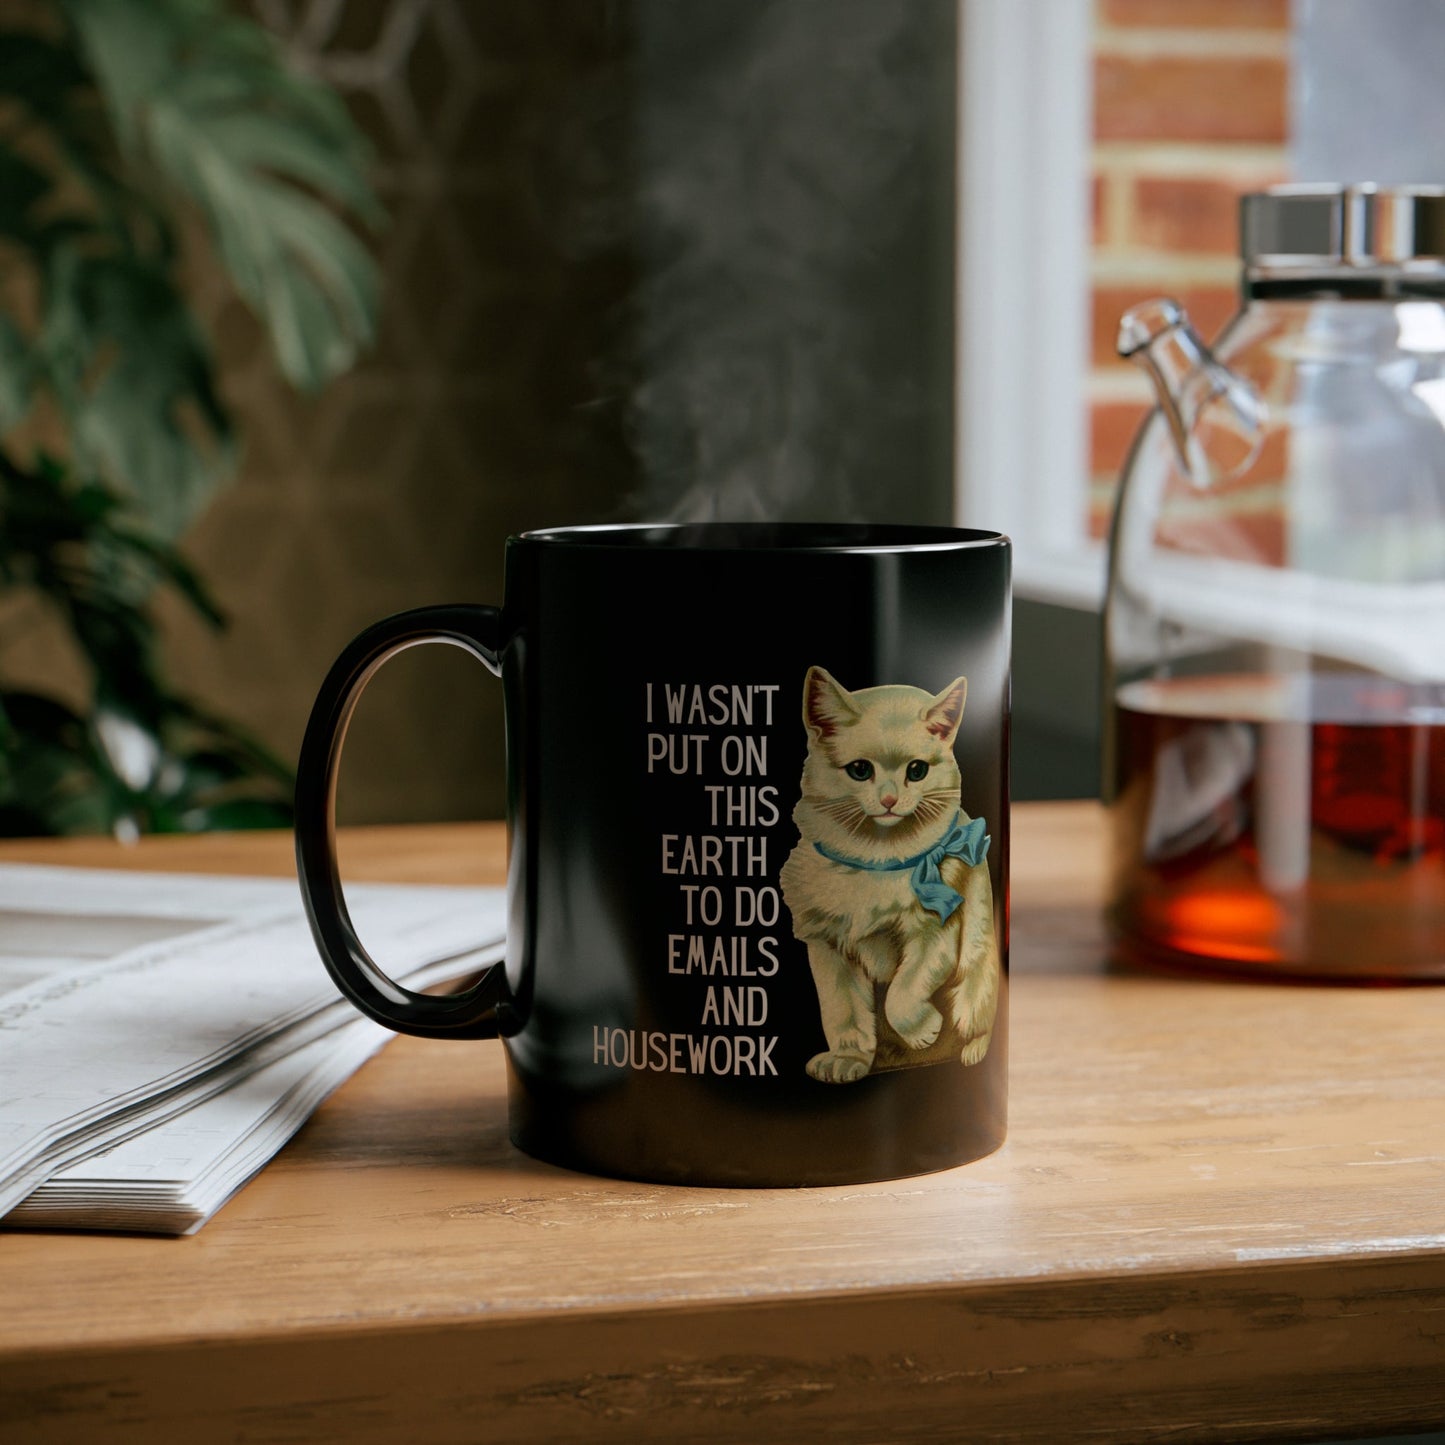 I Wasn't Put On This Earth To do Emails And Housework Black Kitten Mug